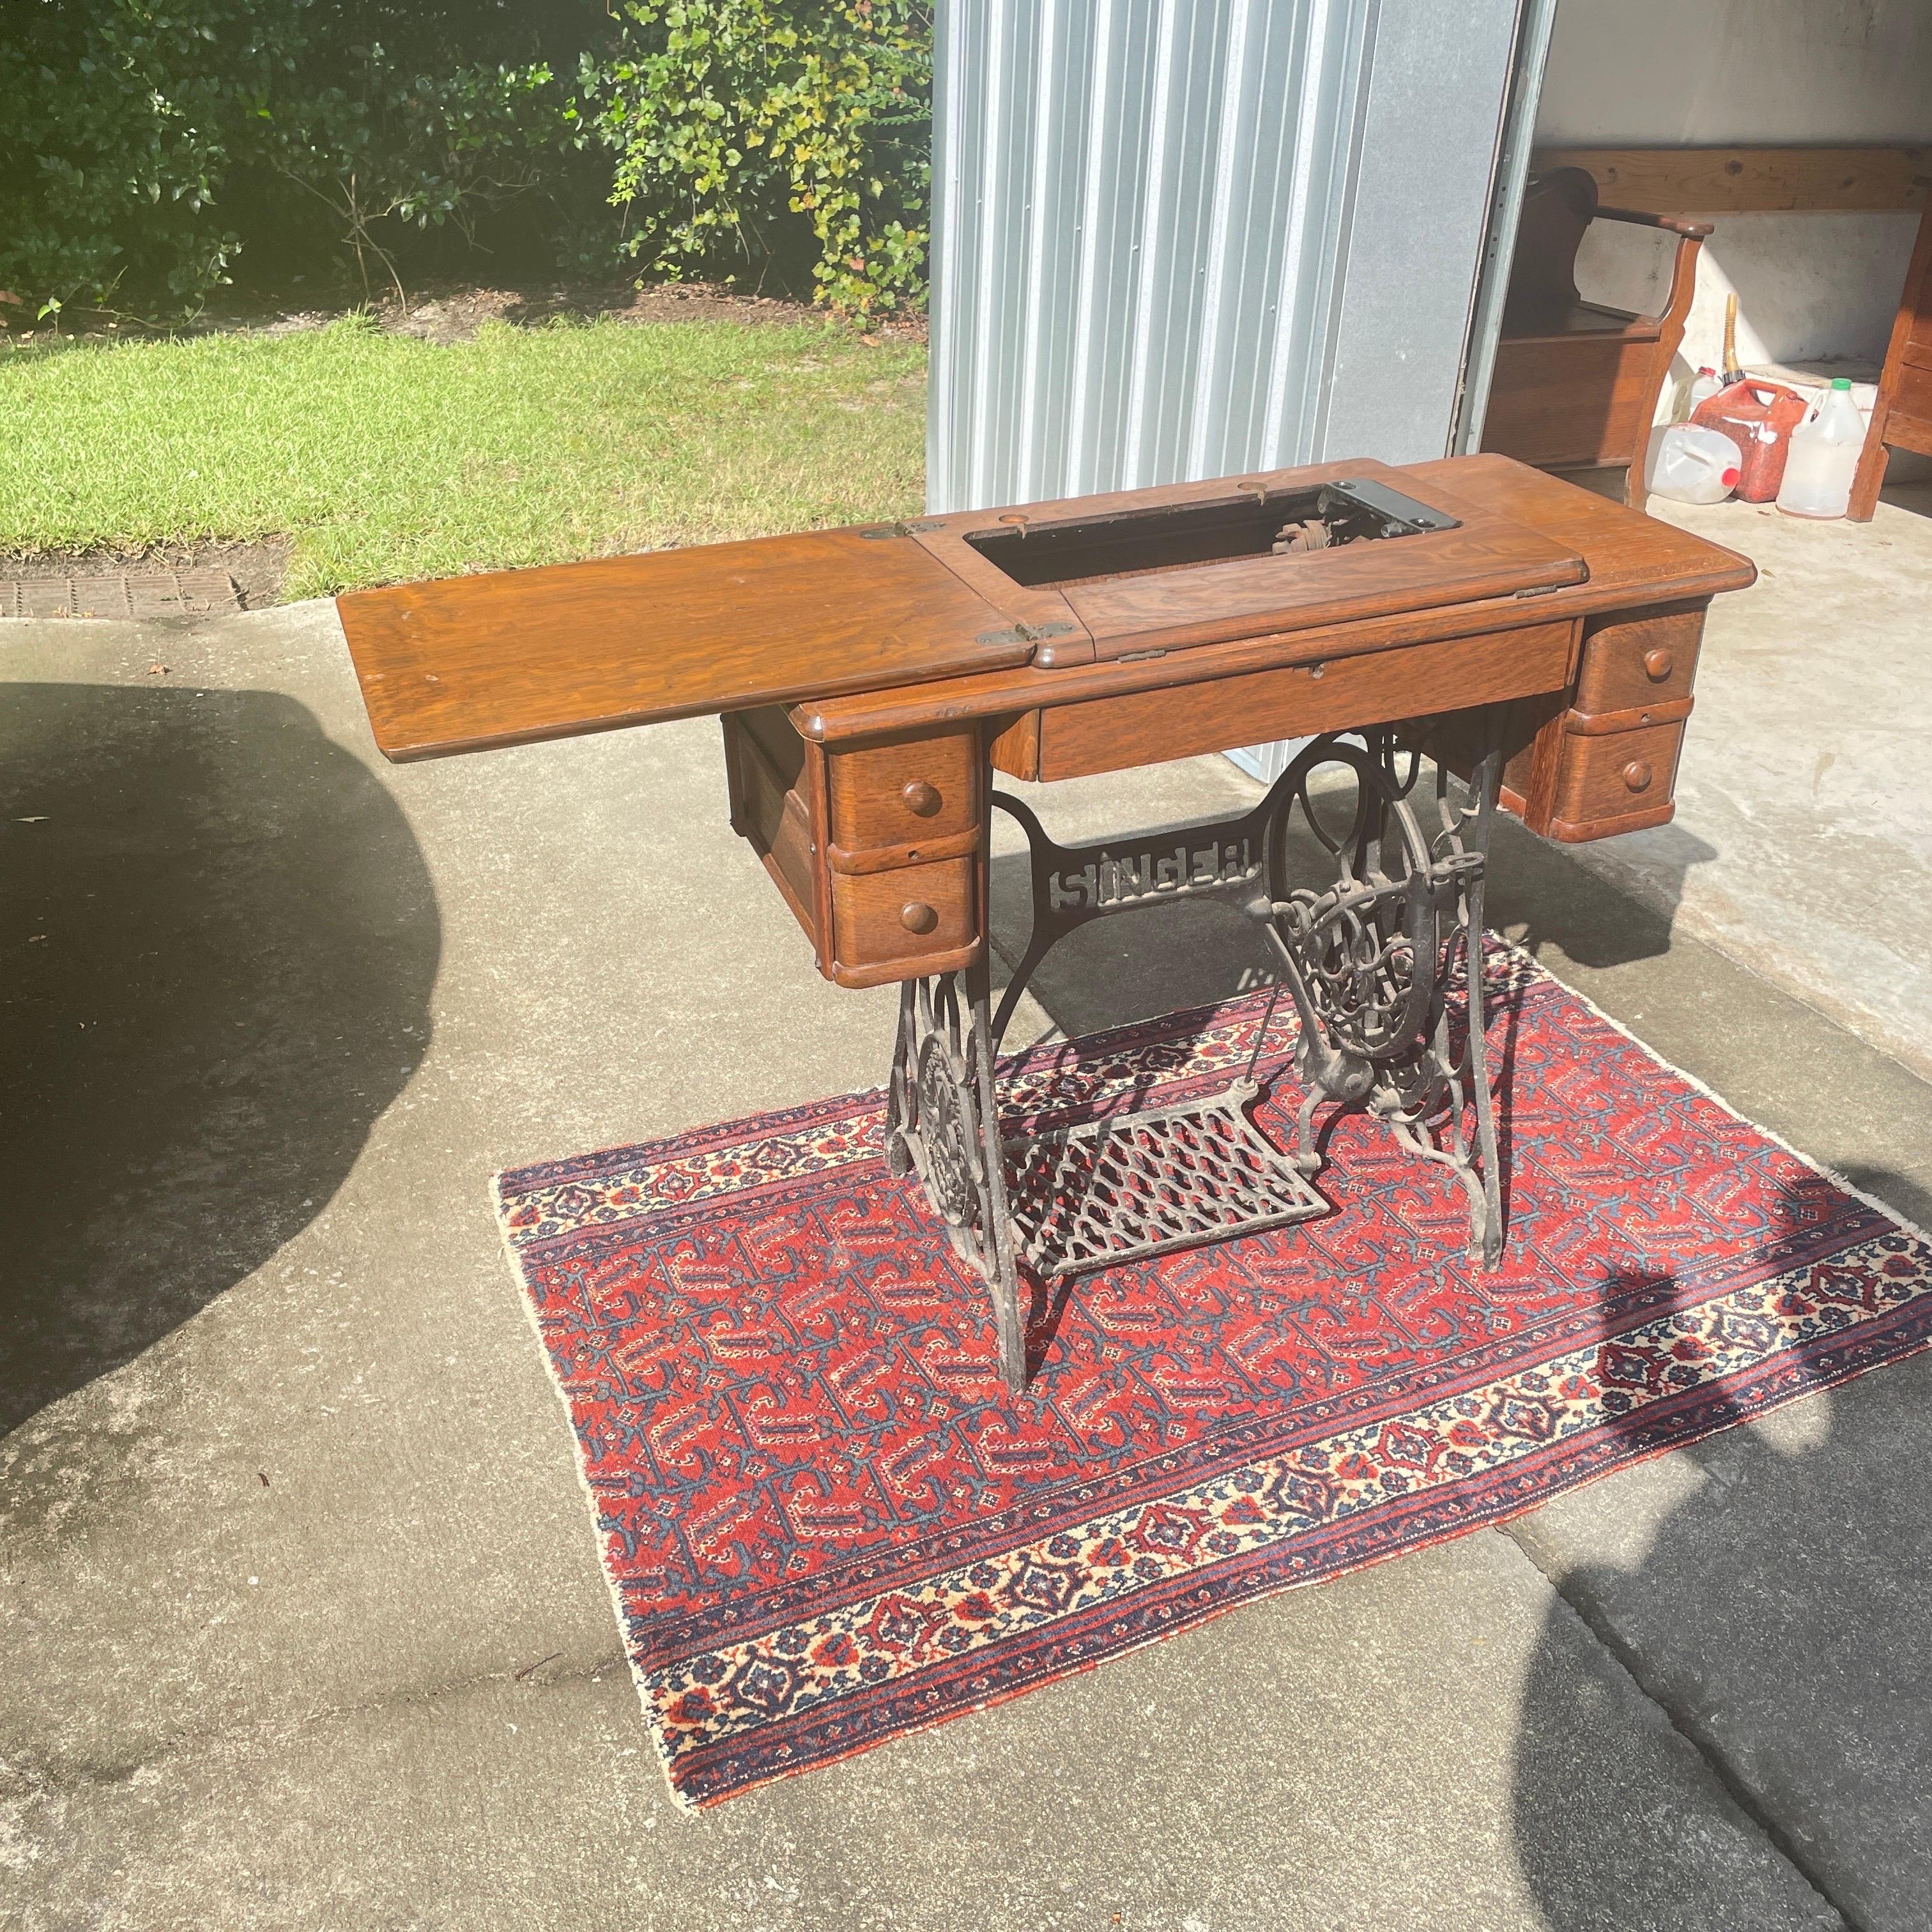 An antique oak sewing machine table with an iron base. As you can see in the first pictures it is of the table in the open position. The antique sewing machine was removed some time ago, but the table retains the original treadle and knobs. This